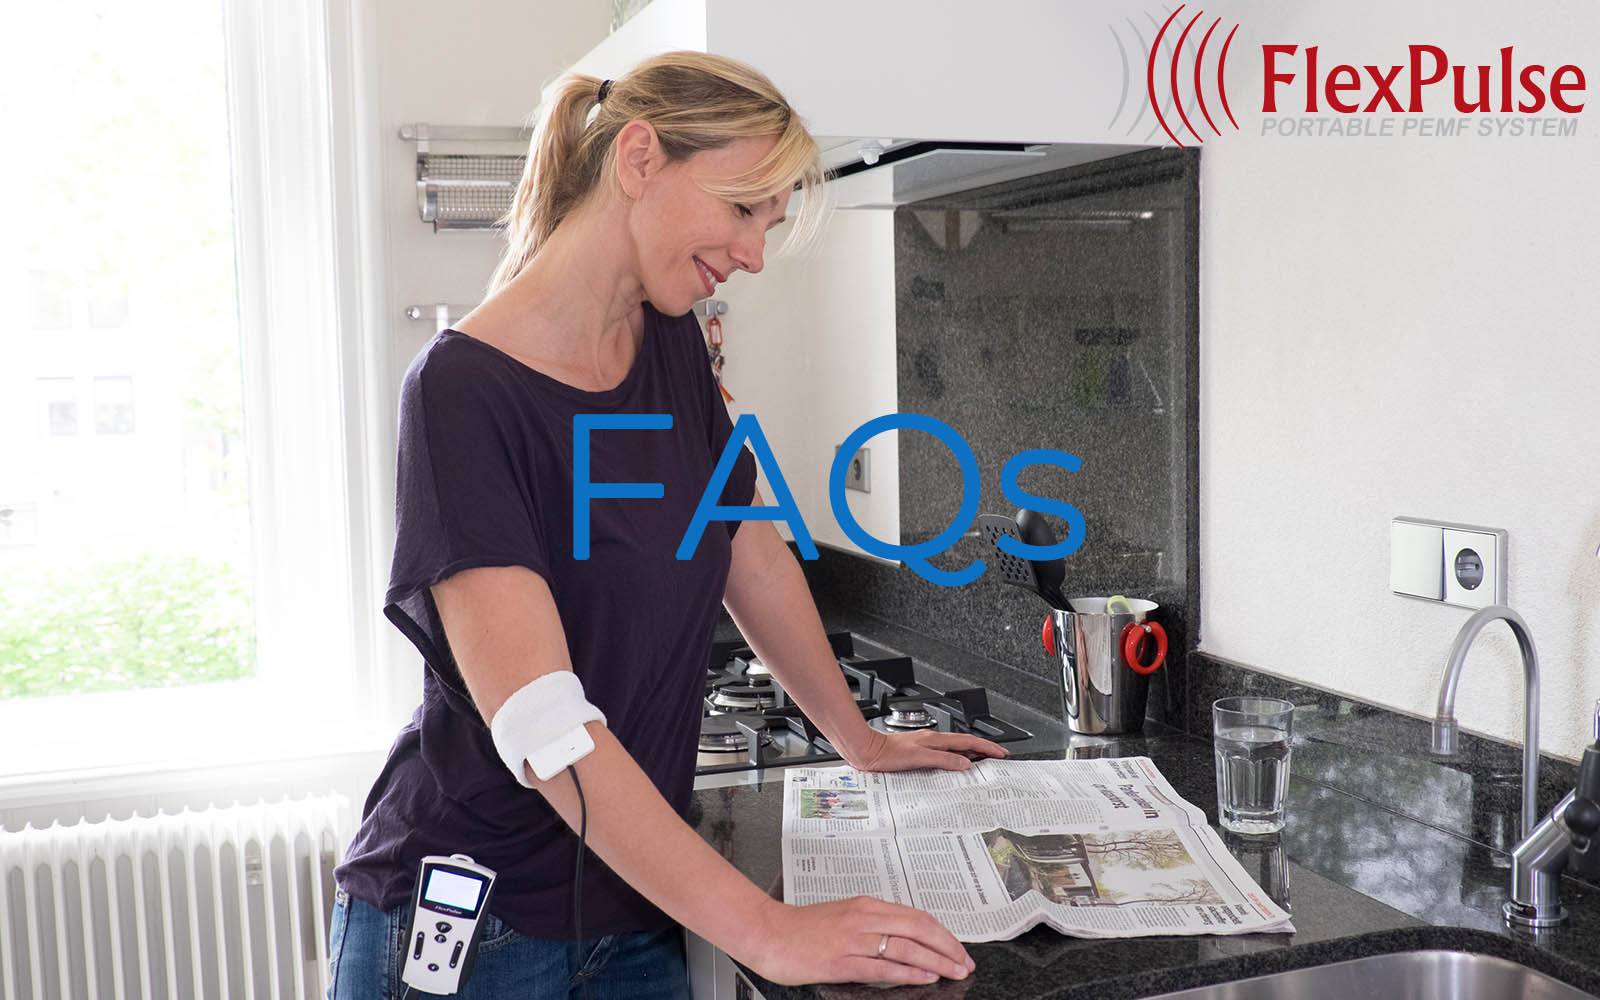 Women her FlexPulse devices, along with the text "FAQ's" and the FlexPulse Portable PEMF System logo